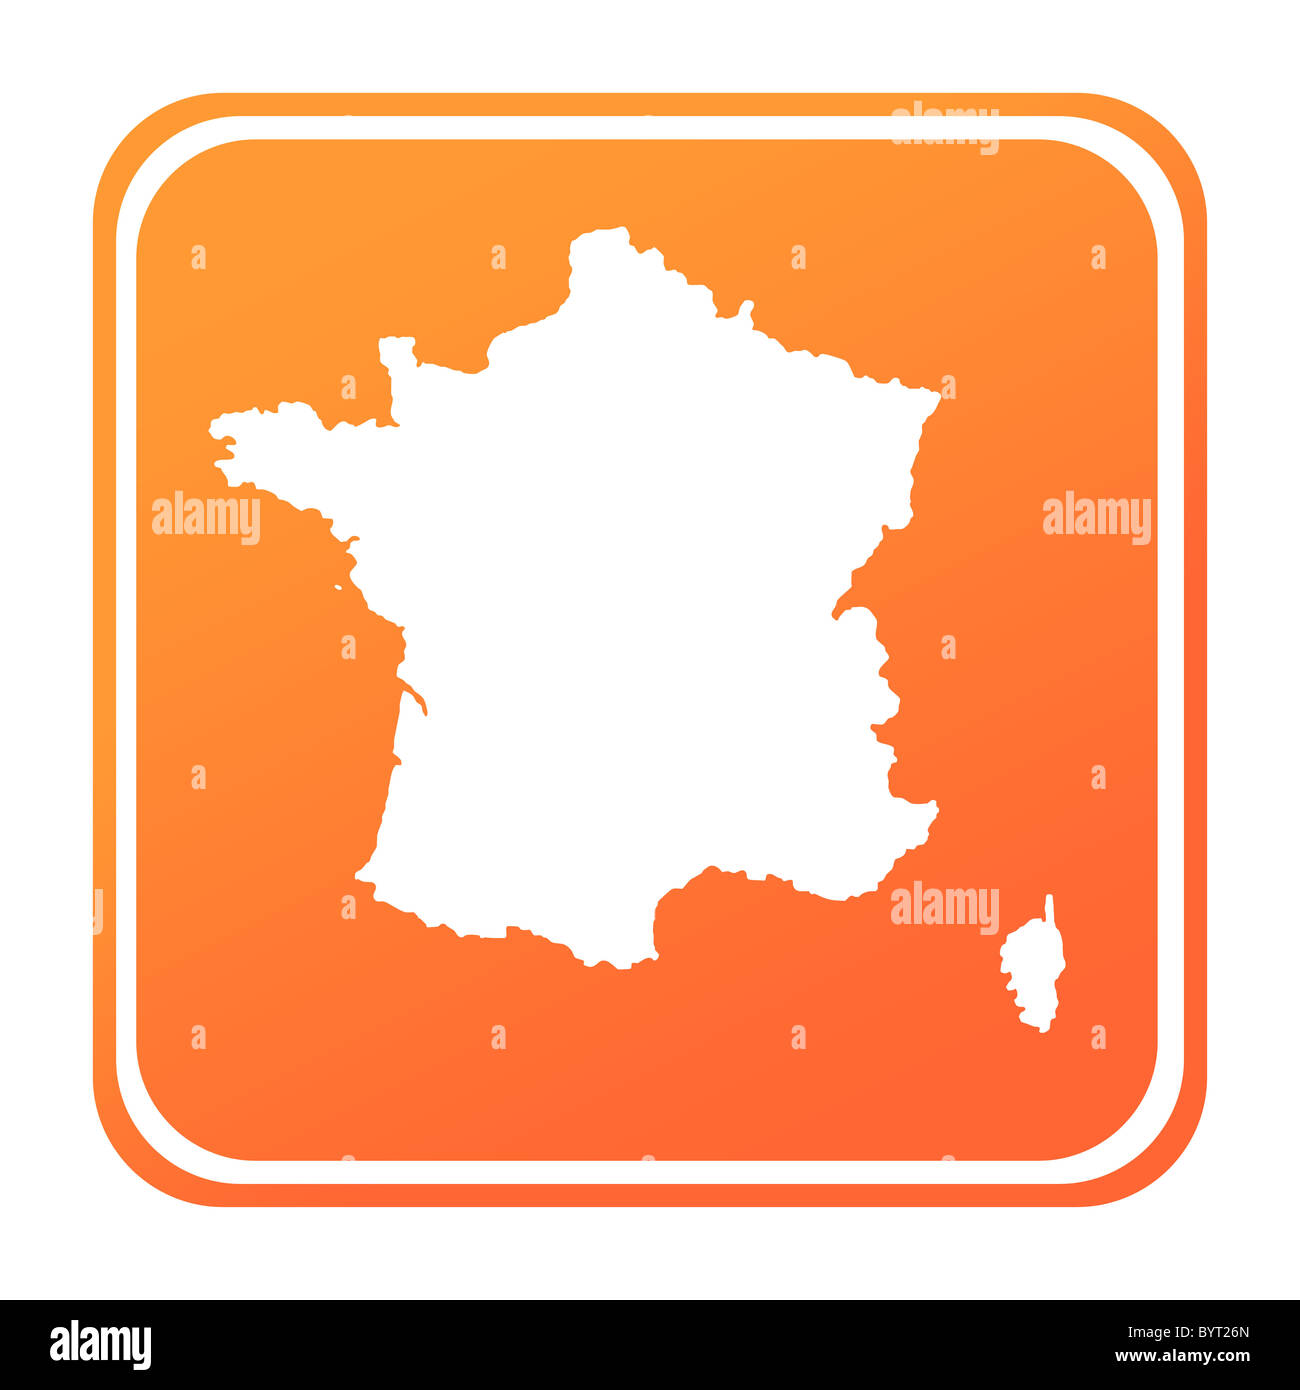 Illustration of France map button; isolated on white background. Stock Photo